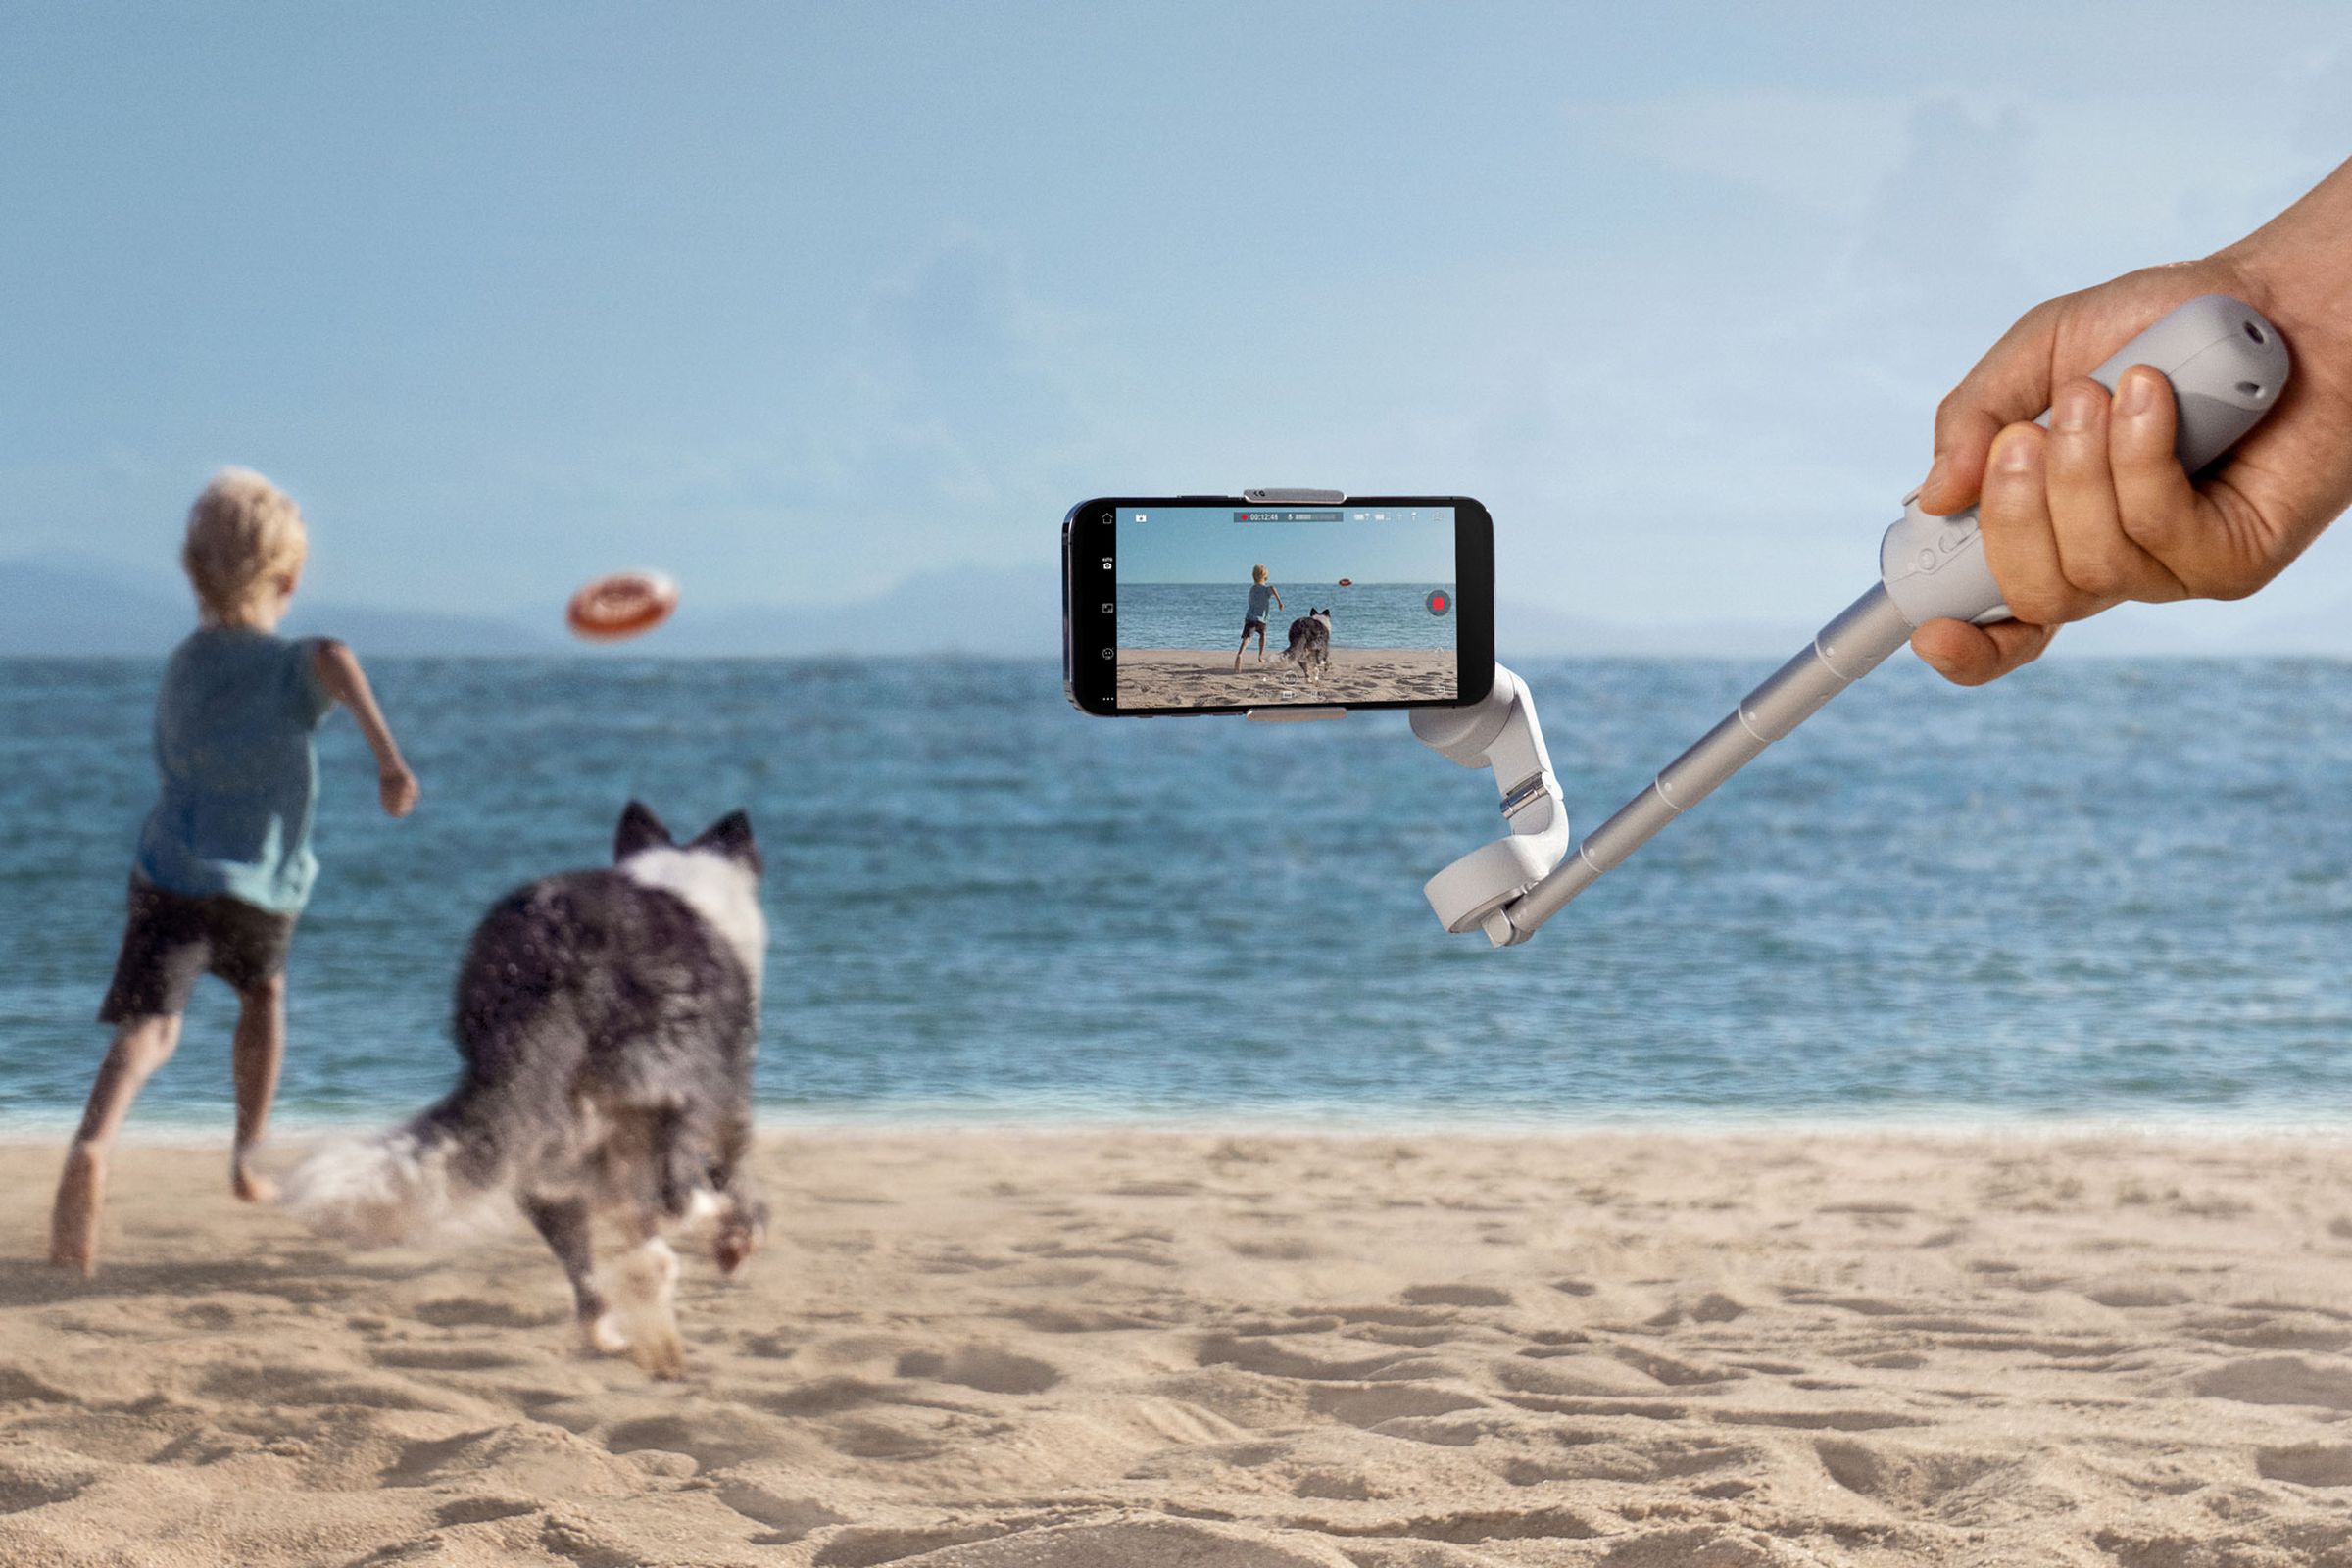 The 8.4-inch built-in extension rod helps you capture footage from more interesting perspectives.